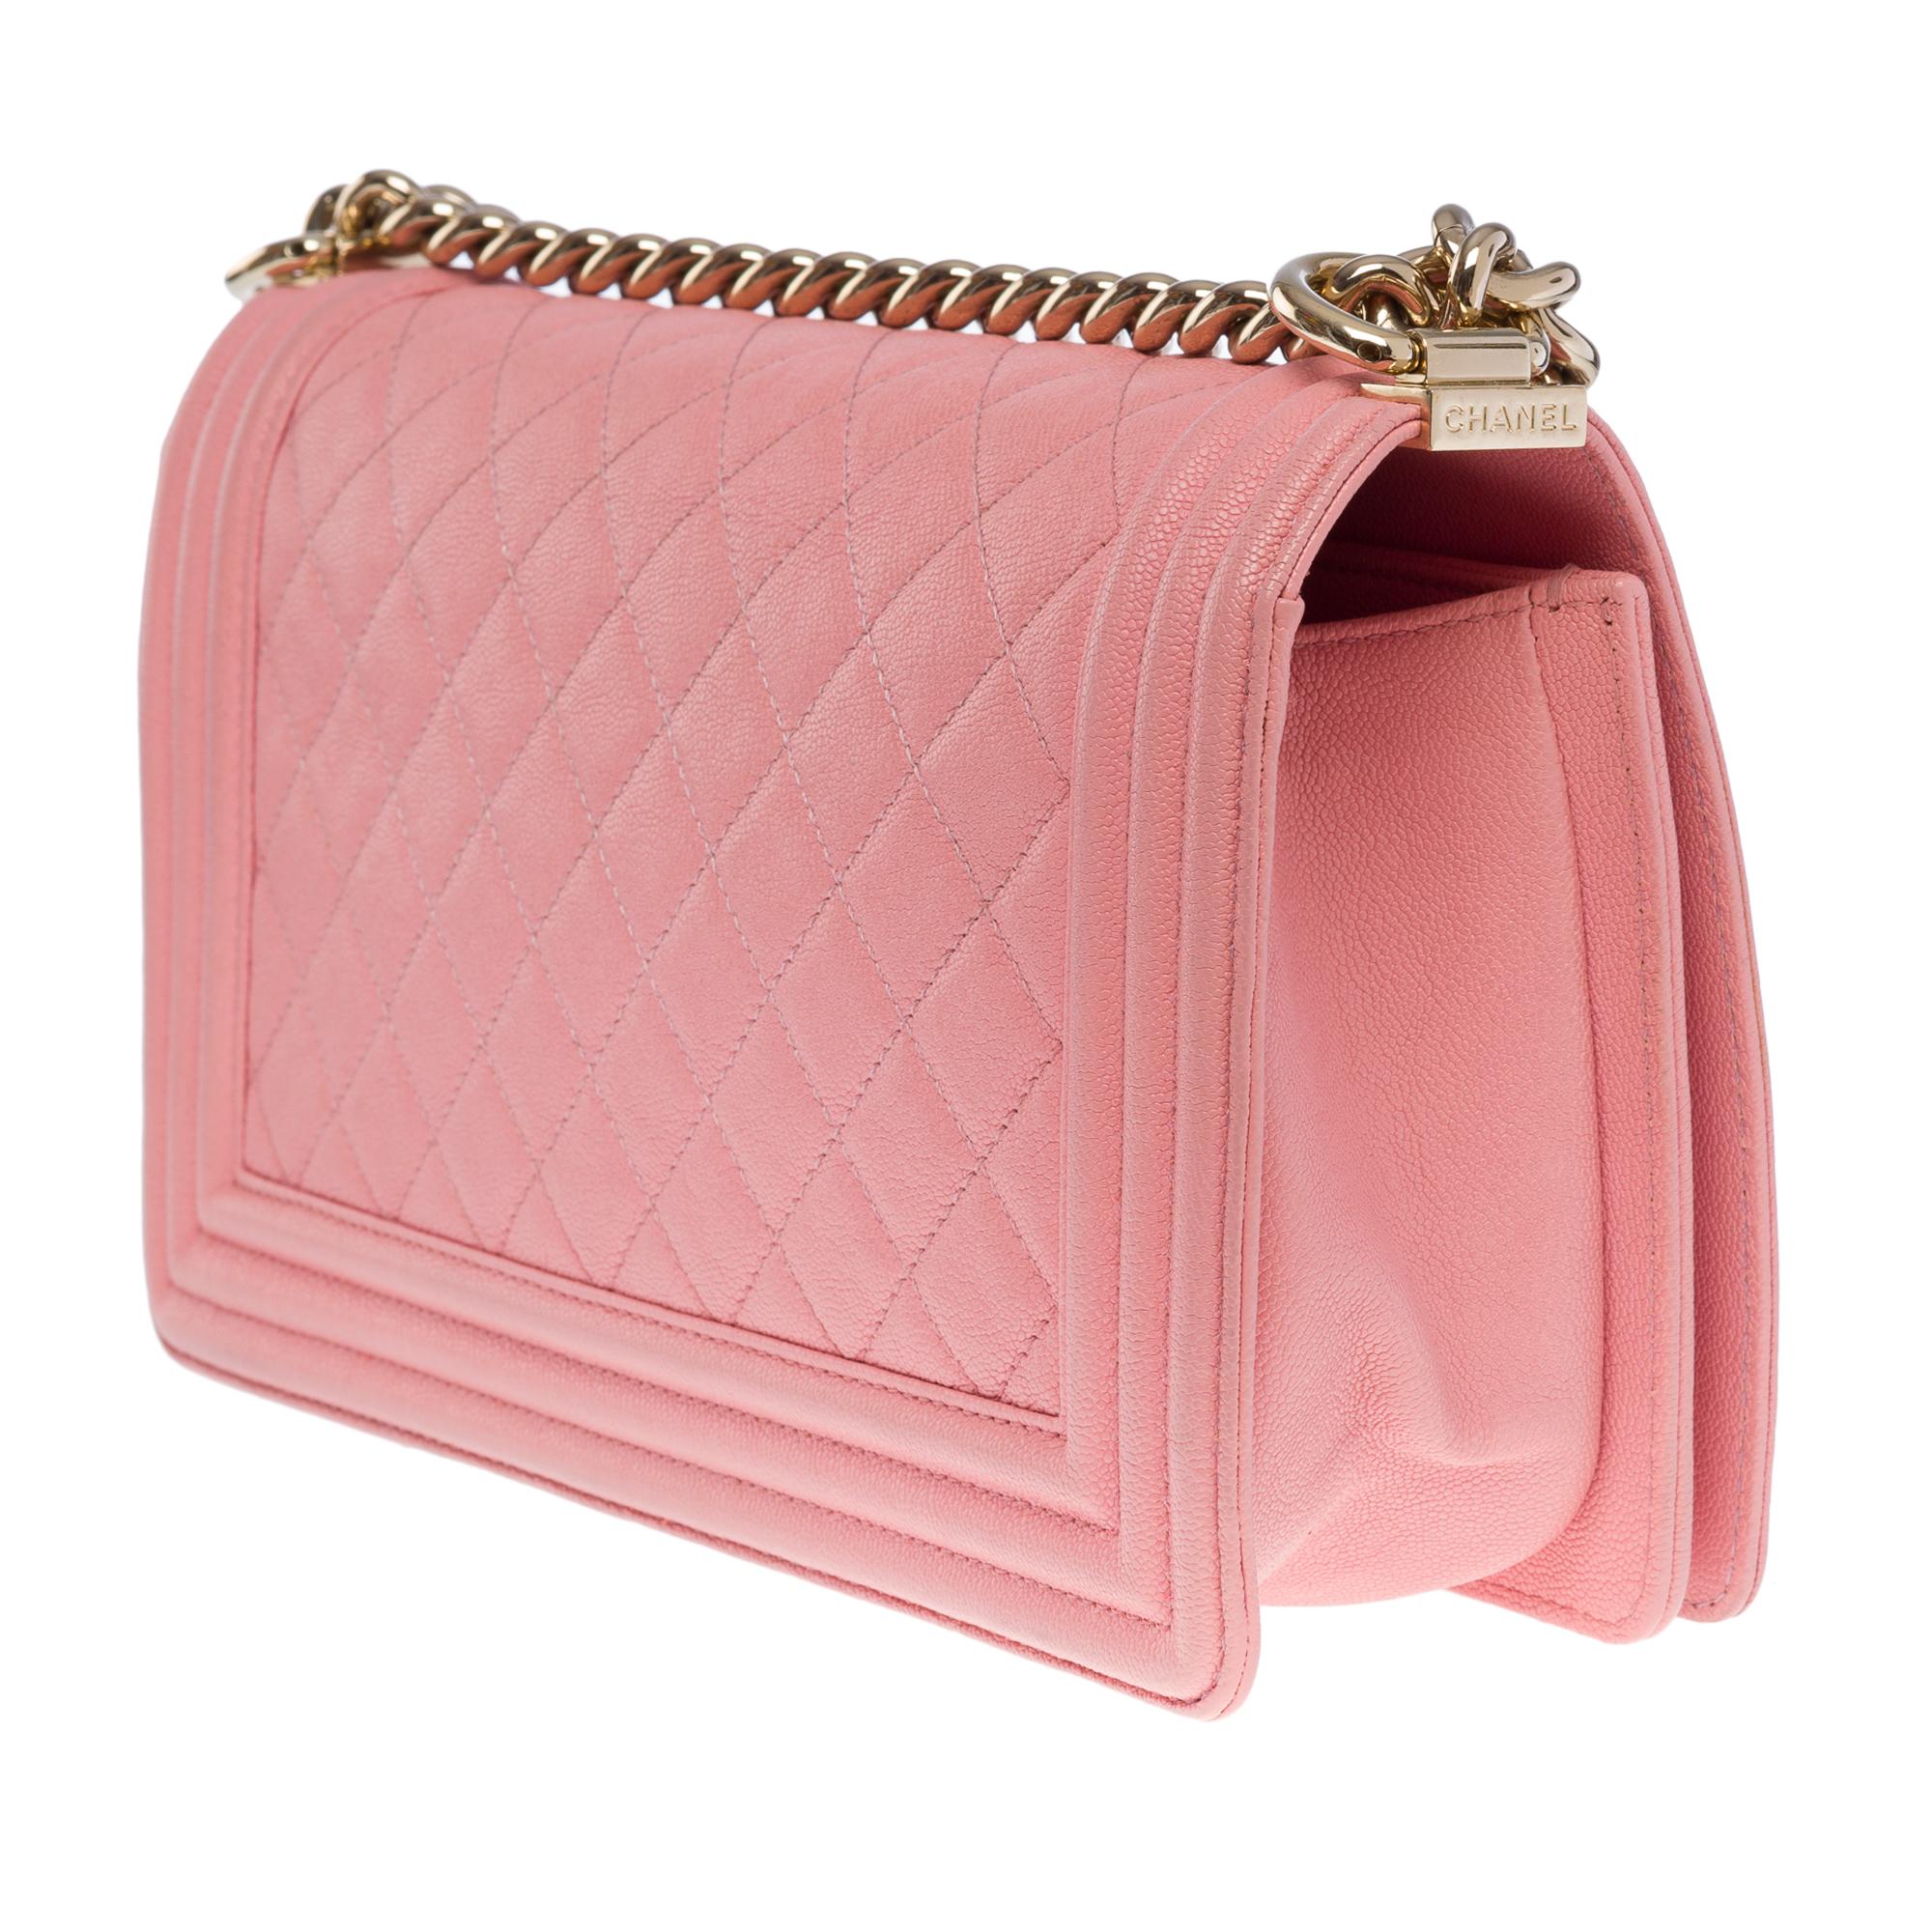 Amazing Chanel Boy Old medium shoulder bag in Pink caviar quilted leather, SHW 1